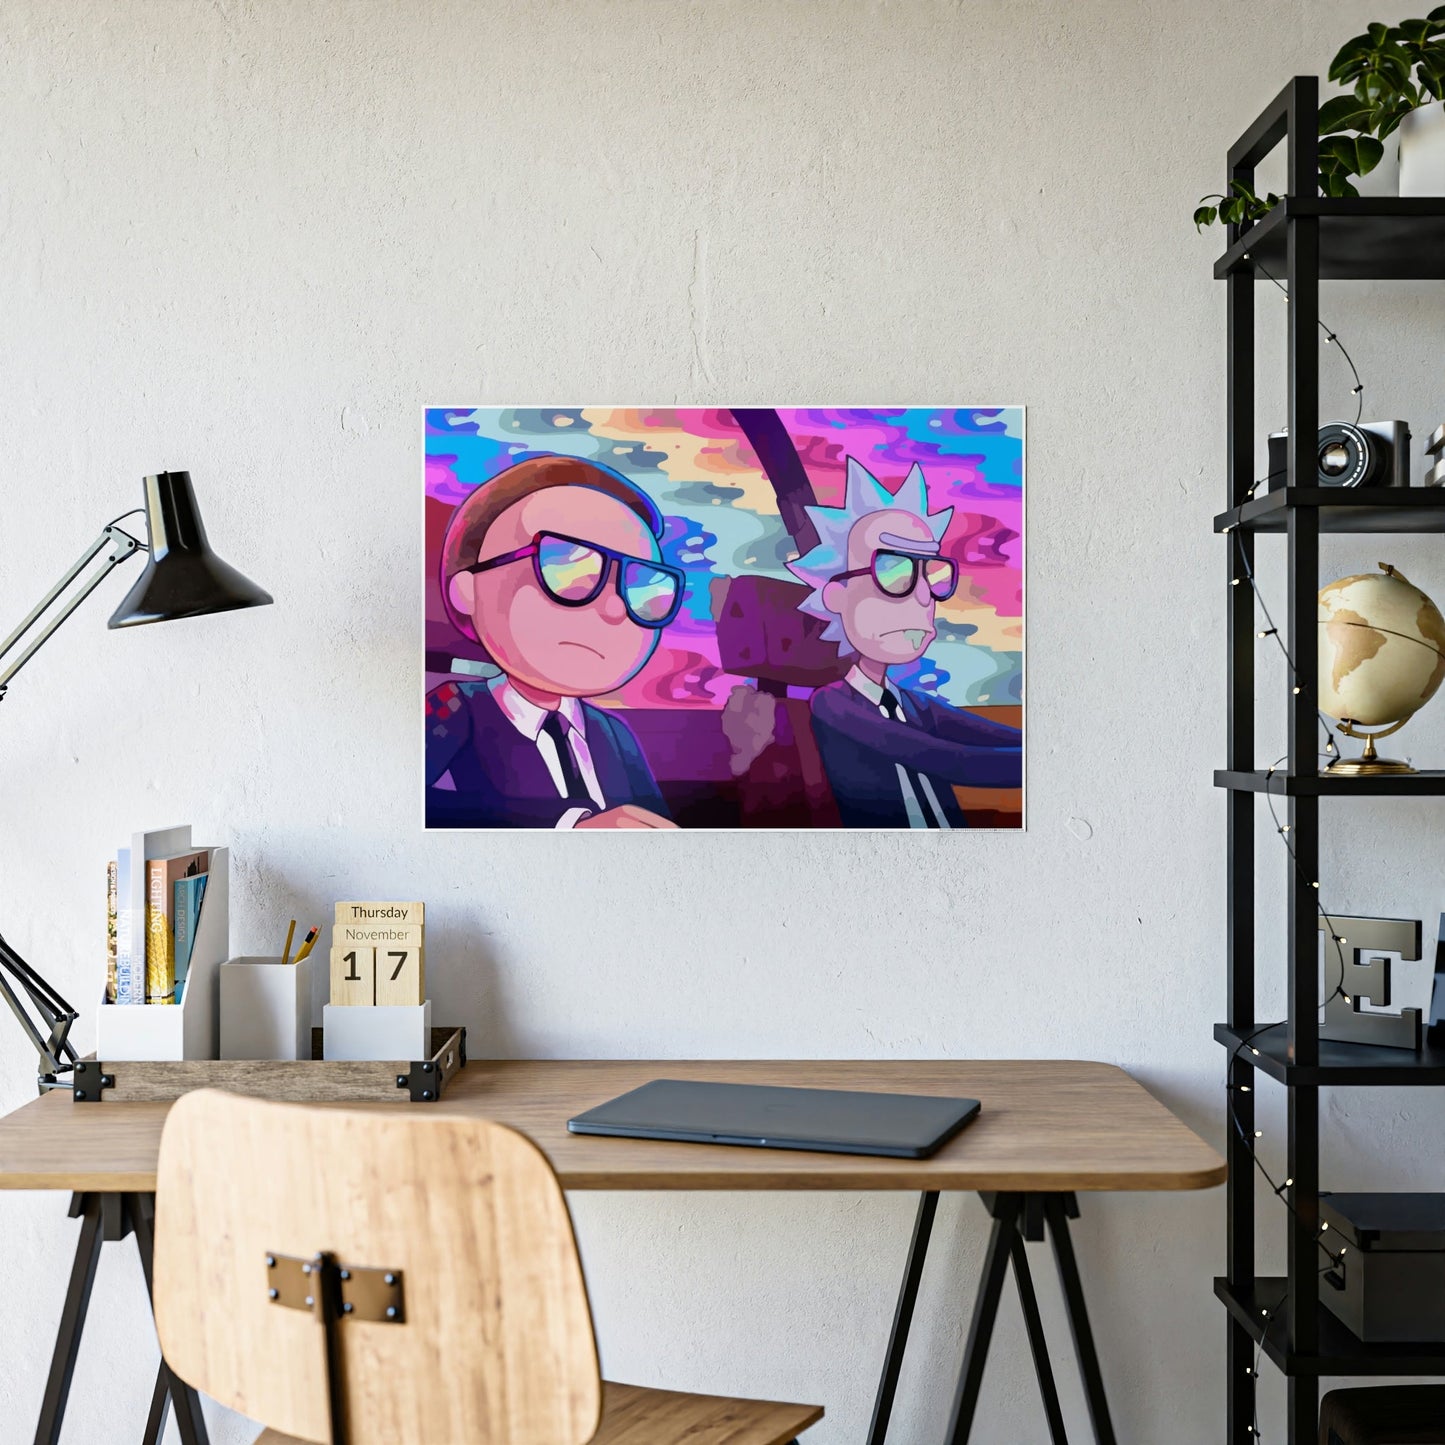 Sci-Fi Adventures: Framed Canvas Wall Art Featuring Rick and Morty Cartoon Characters